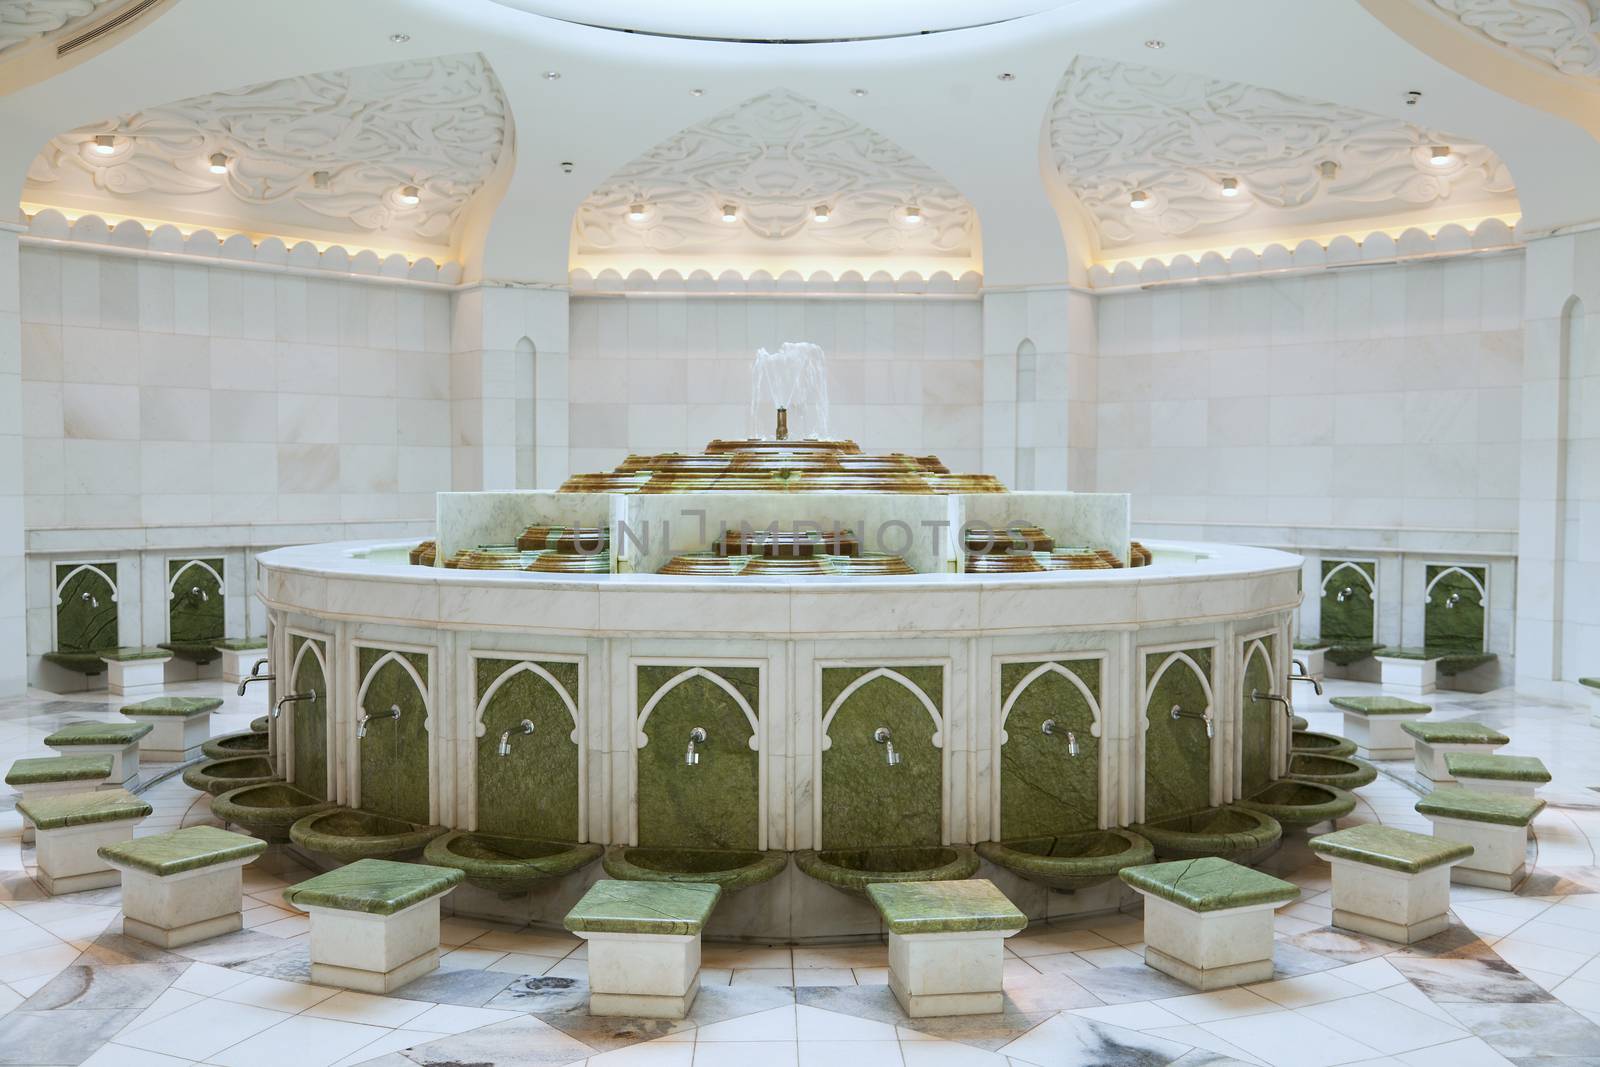 Sheikh Zayed Grand Mosque ablution by oleandra